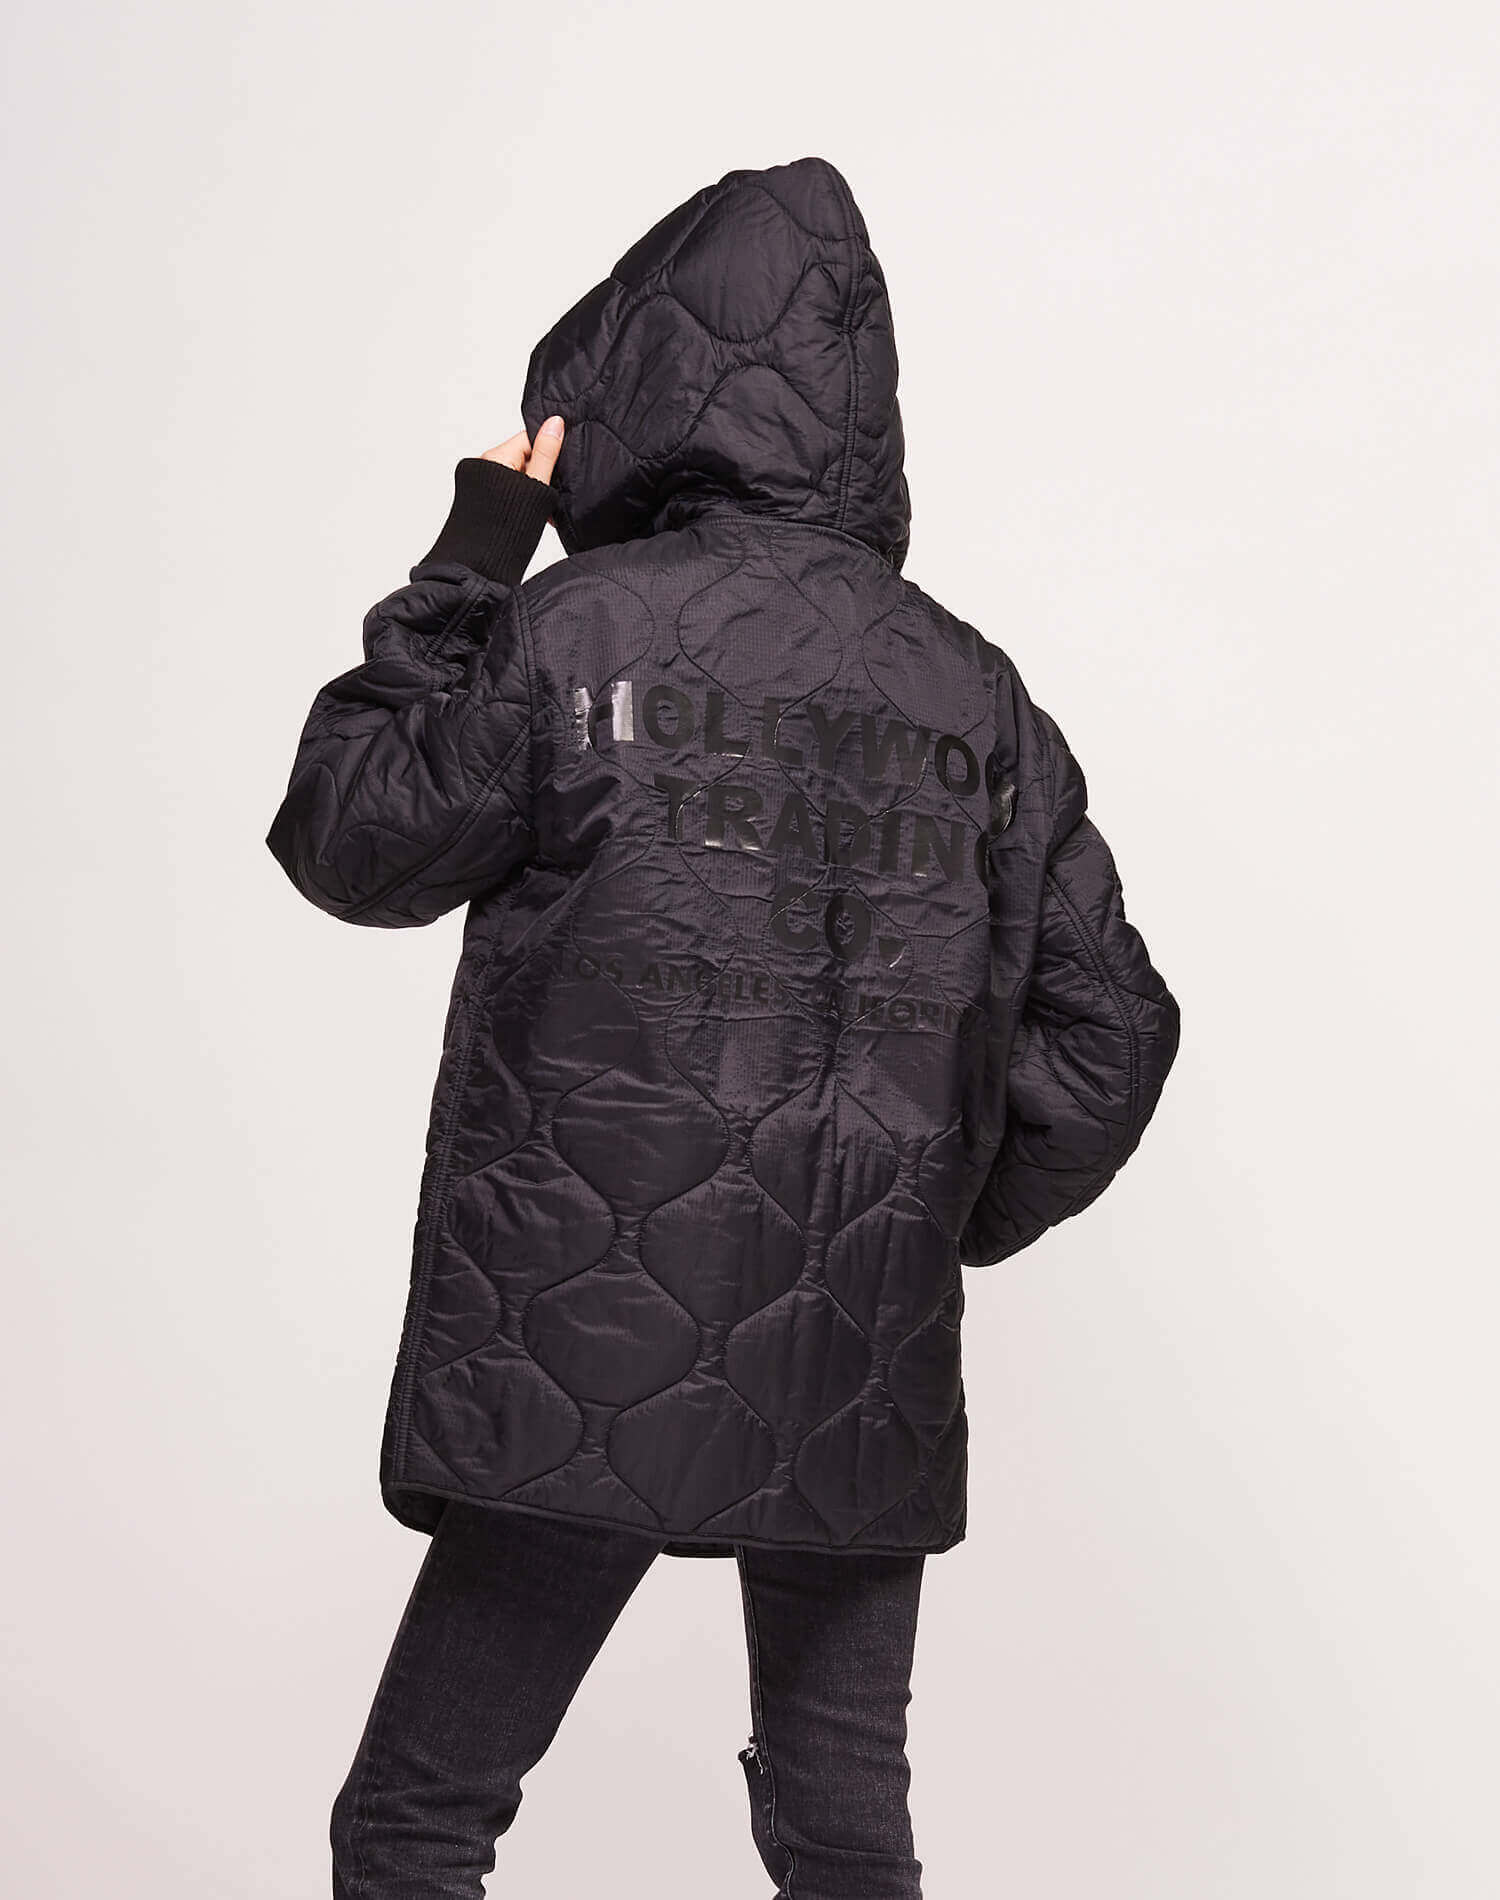 HOODIE QUILTED JACKET Lightweight padded hoodie jacket. Front zip closure. Two frontal pockets. Hollywood Trading Company printed on the back. 100% Polyester HTC LOS ANGELES